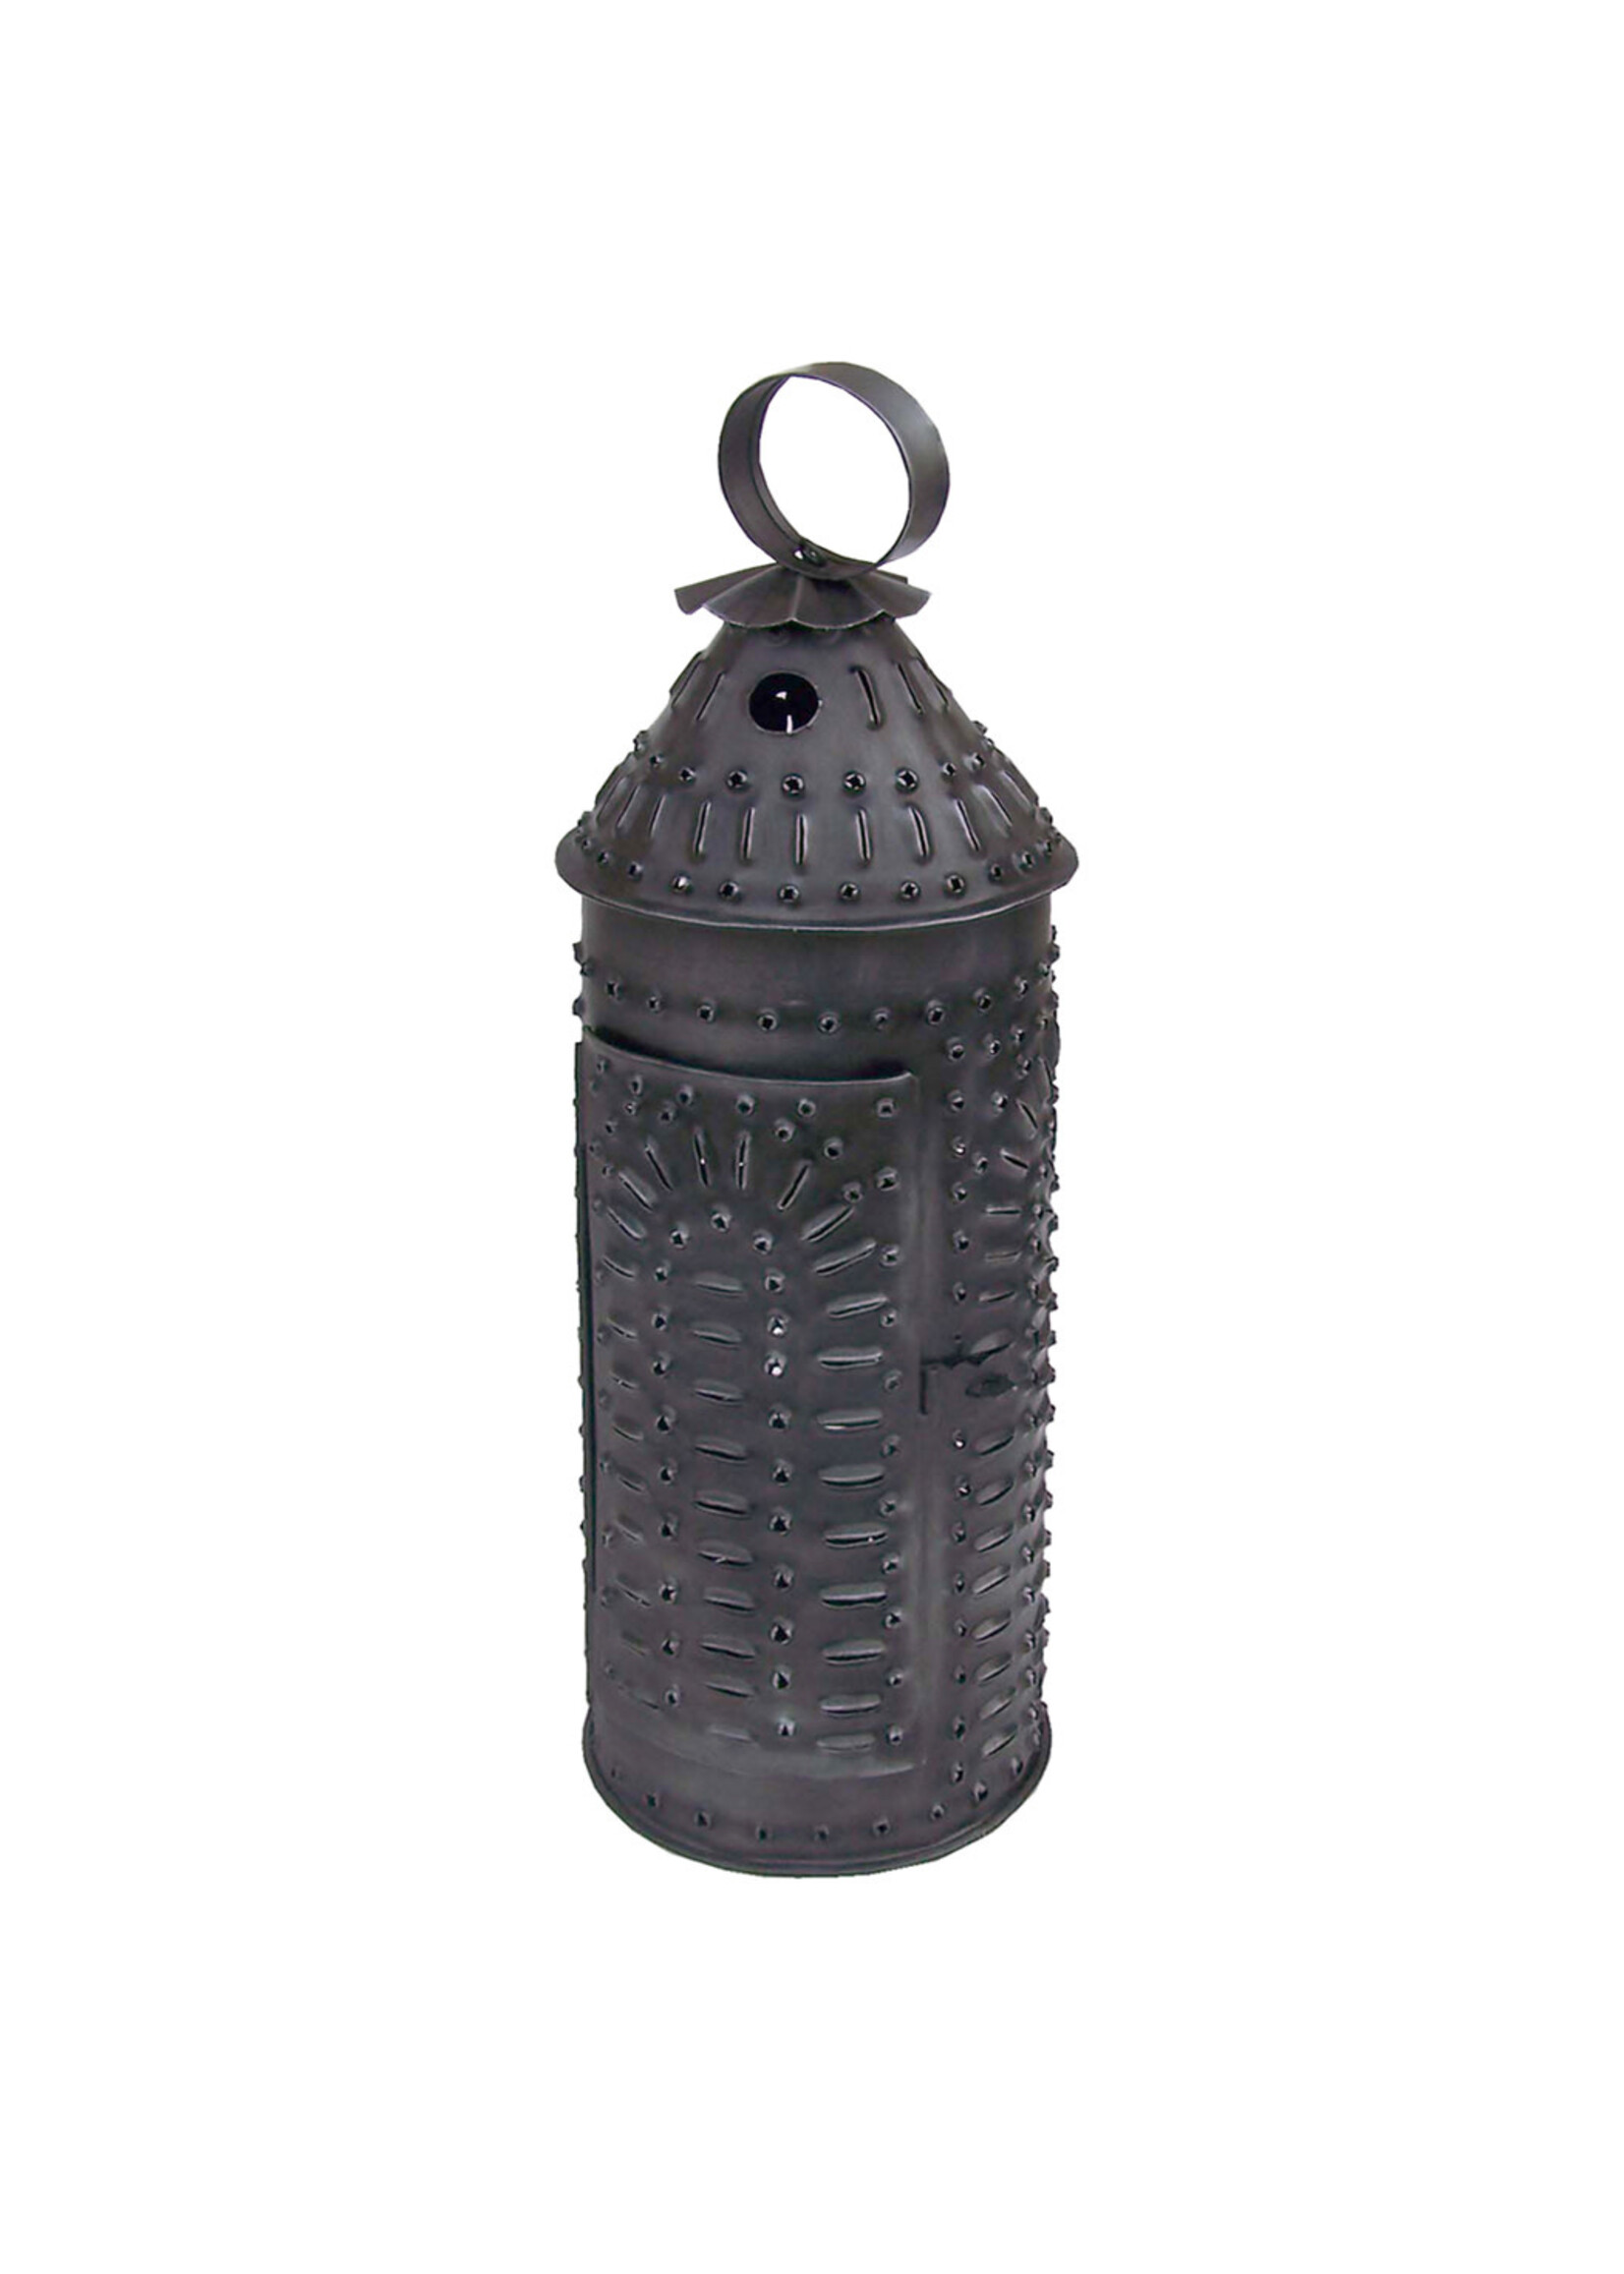 13-1/2″ Punched Tin Lantern- Antique Vintage Style